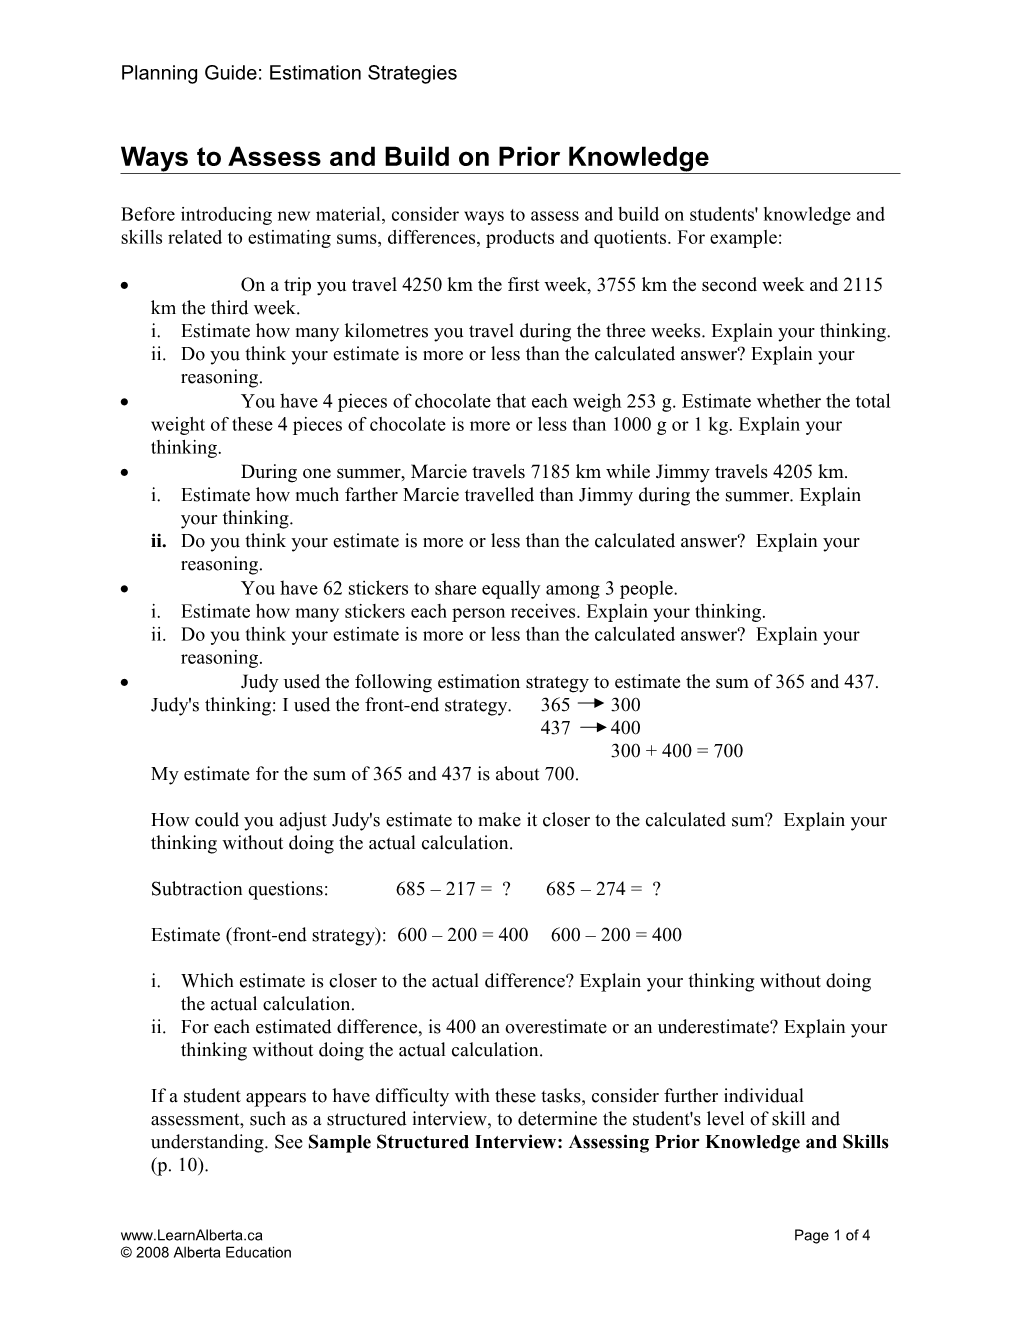 Ways to Assess and Build on Prior Knowledge